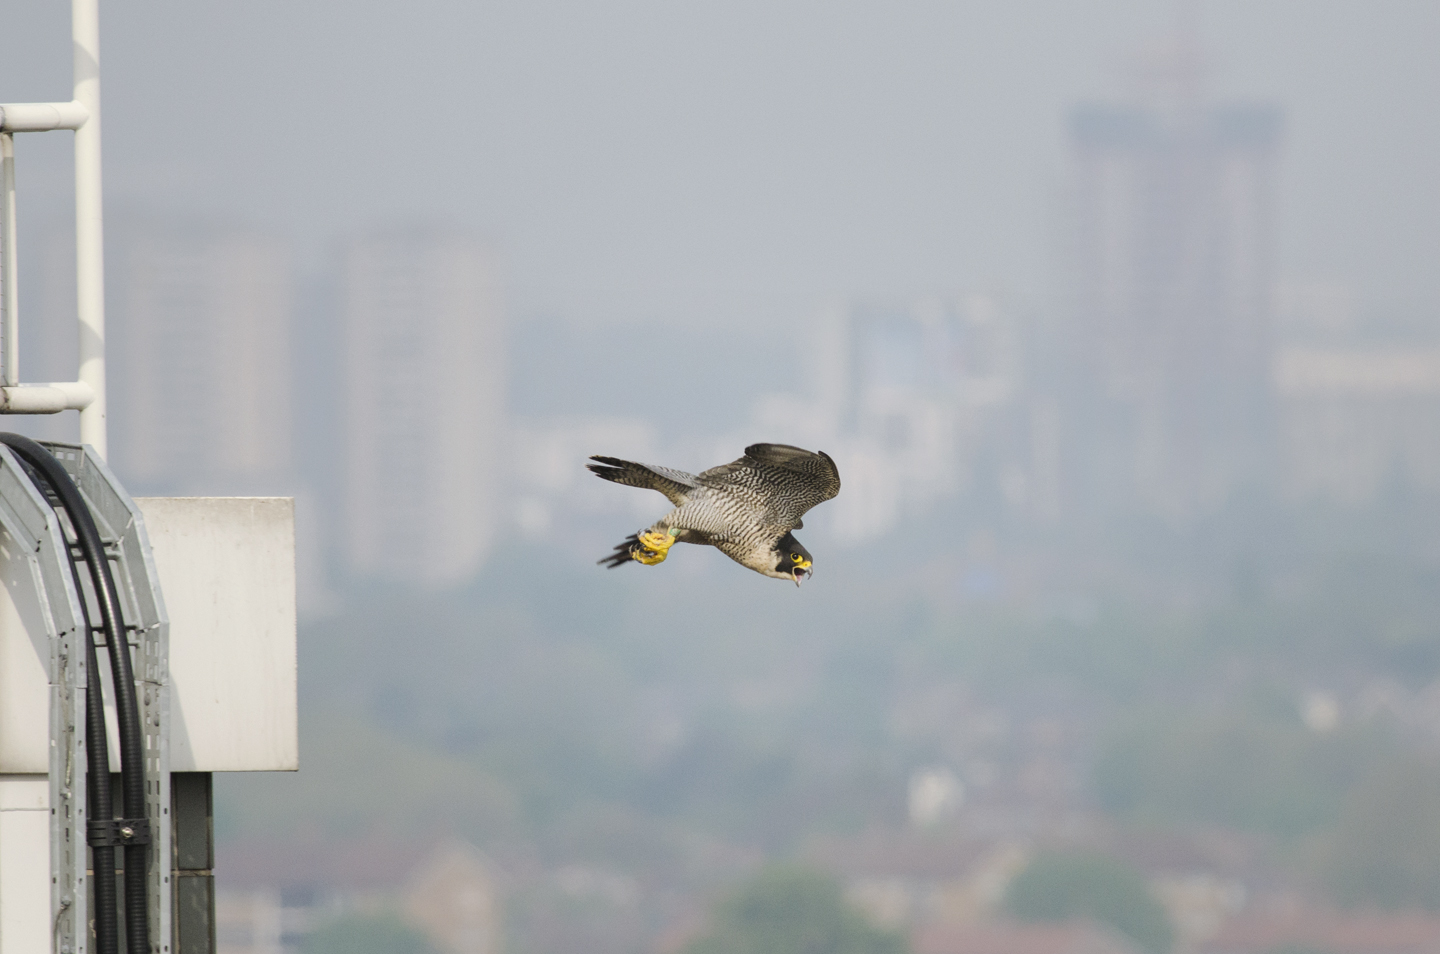  The artificial lights from buildings and street-lamps create a glow, which the peregrines use to hunt migrants on passage under the cover of darkness, oblivious to the dangers below 